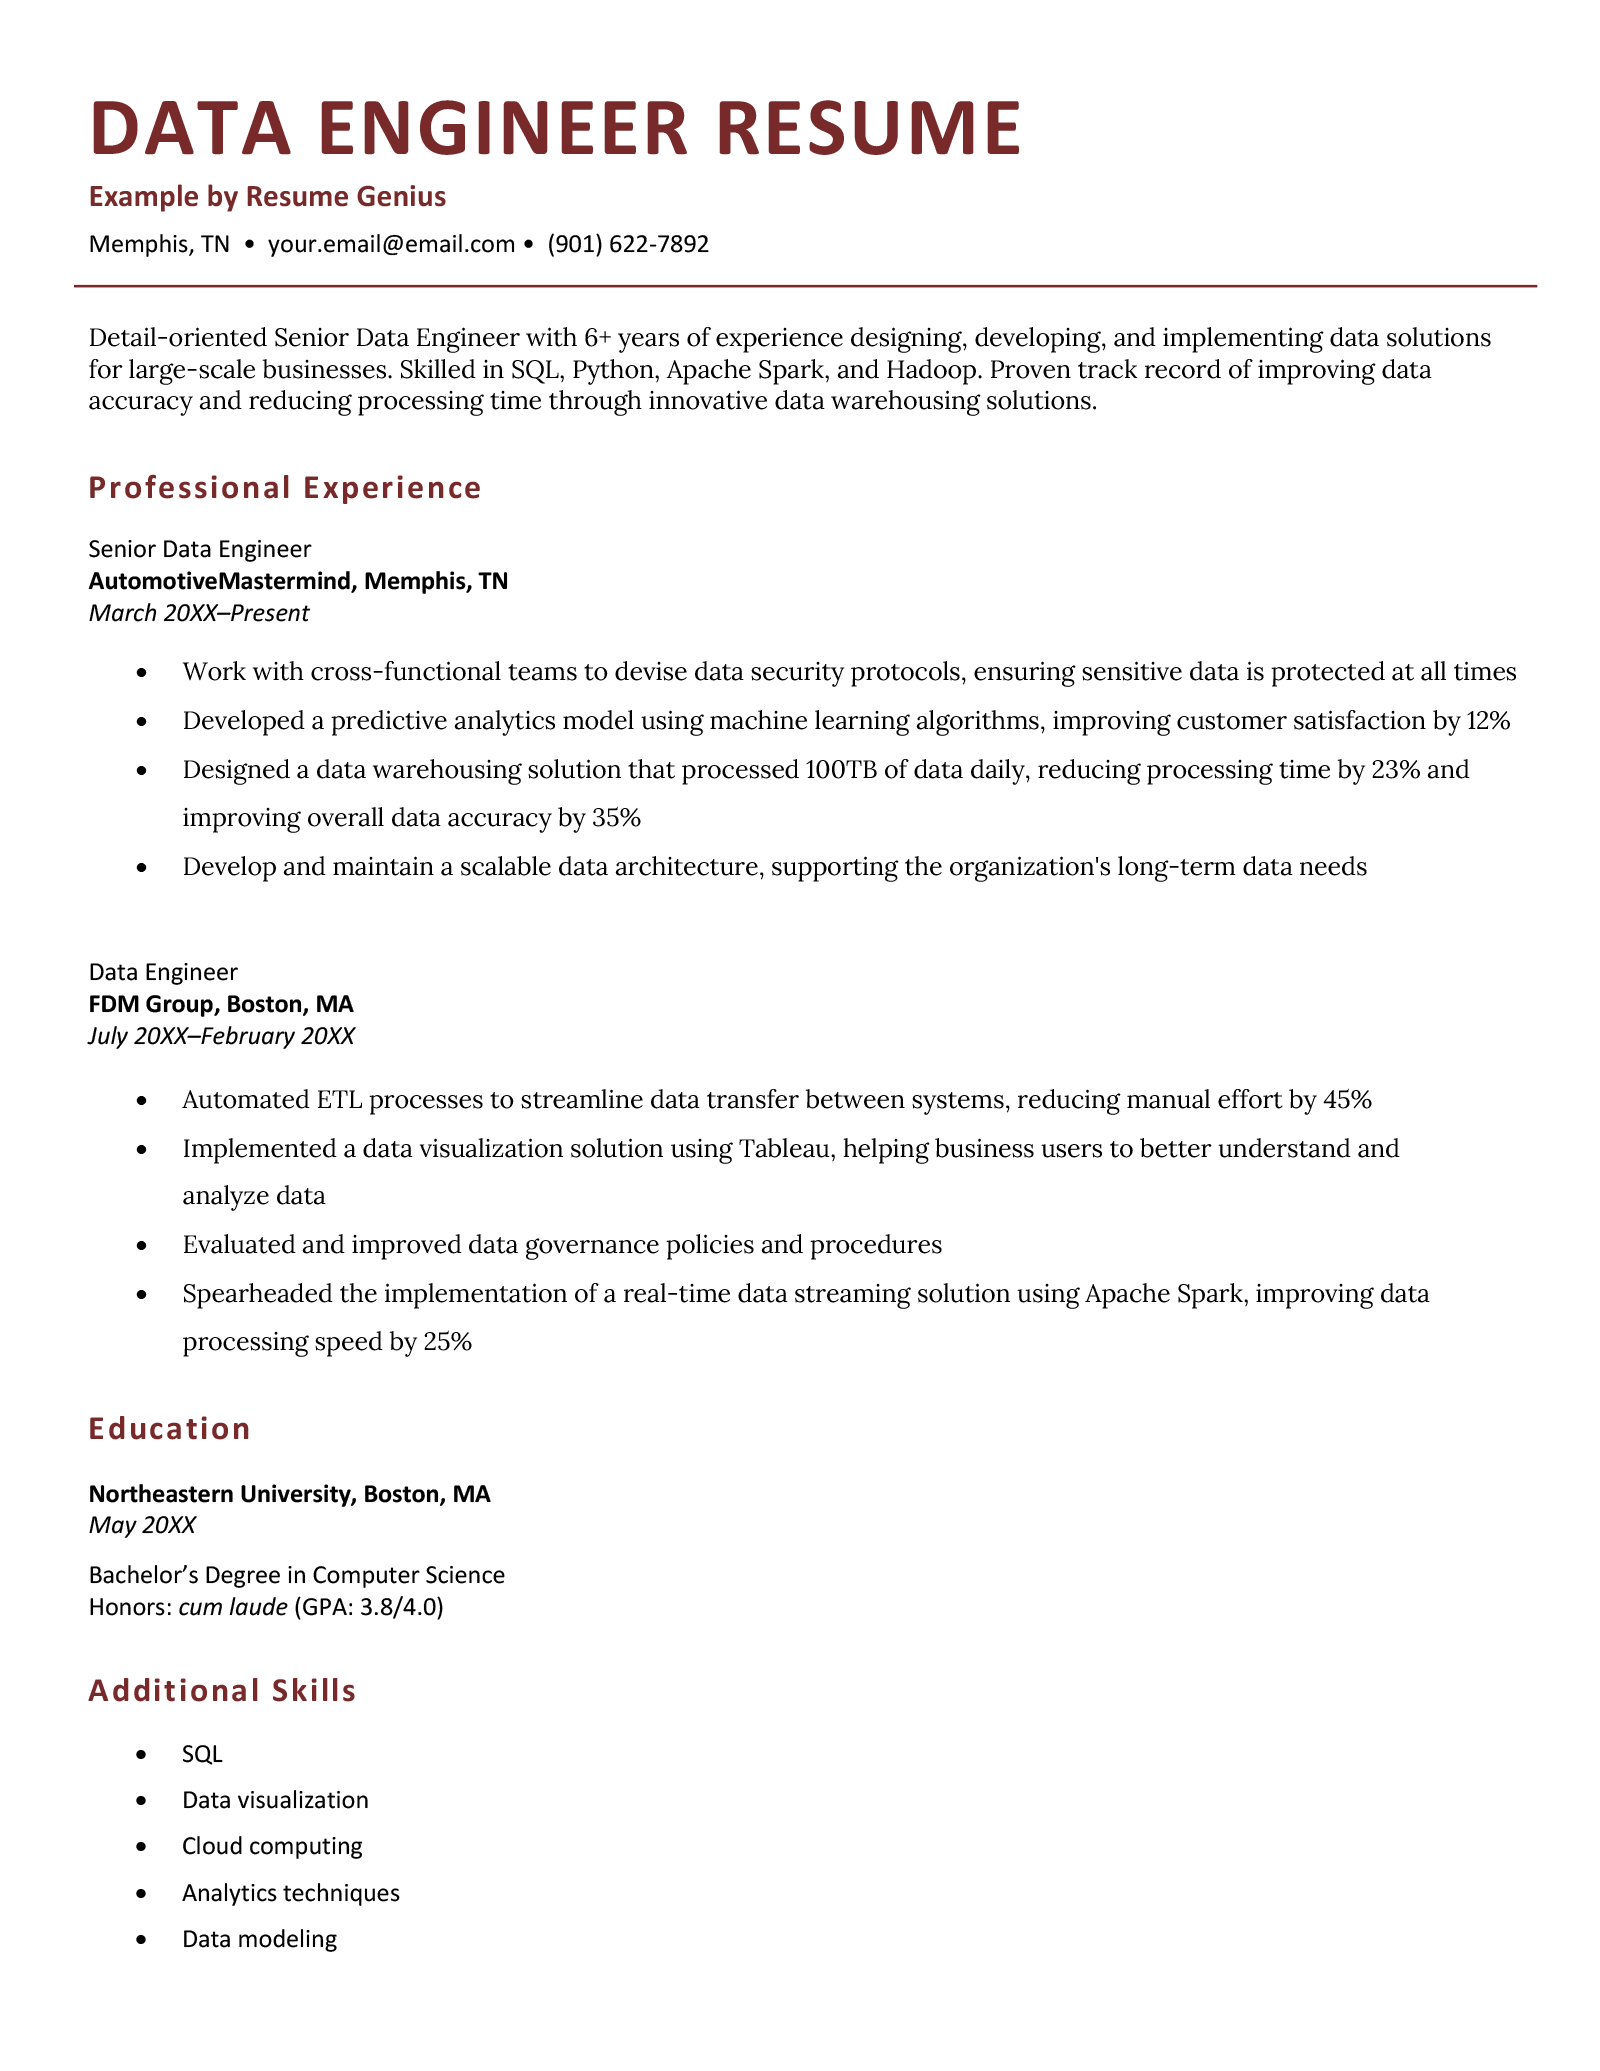 A data engineer resume sample on a simple, professional-looking template with each resume section header highlighted in red text.